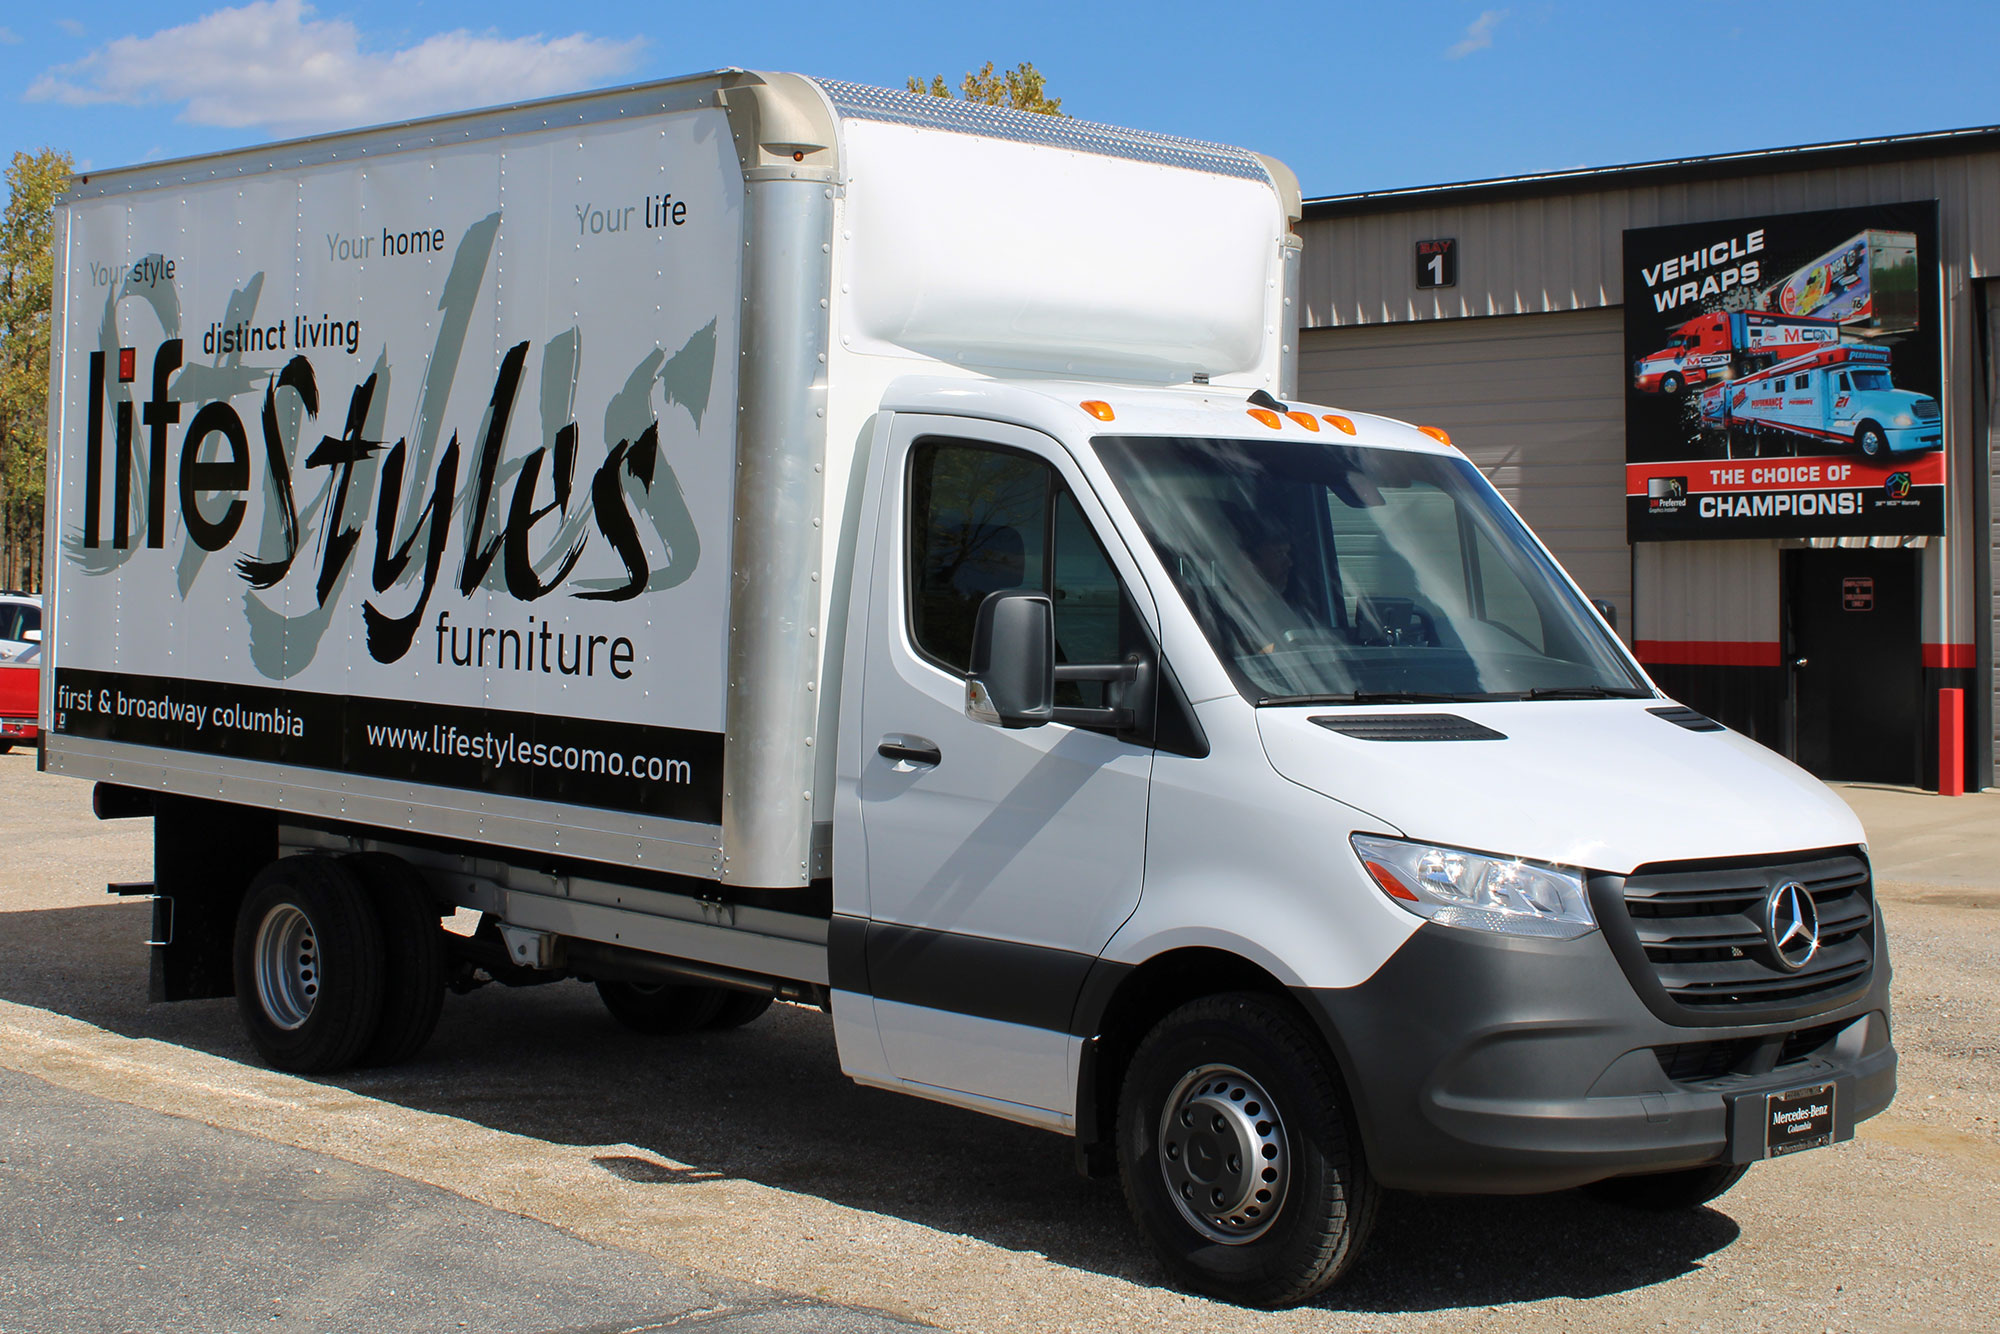 Life Styles Furniture Box Truck Wrap Advertising Pro Dezigns Columbia Mo